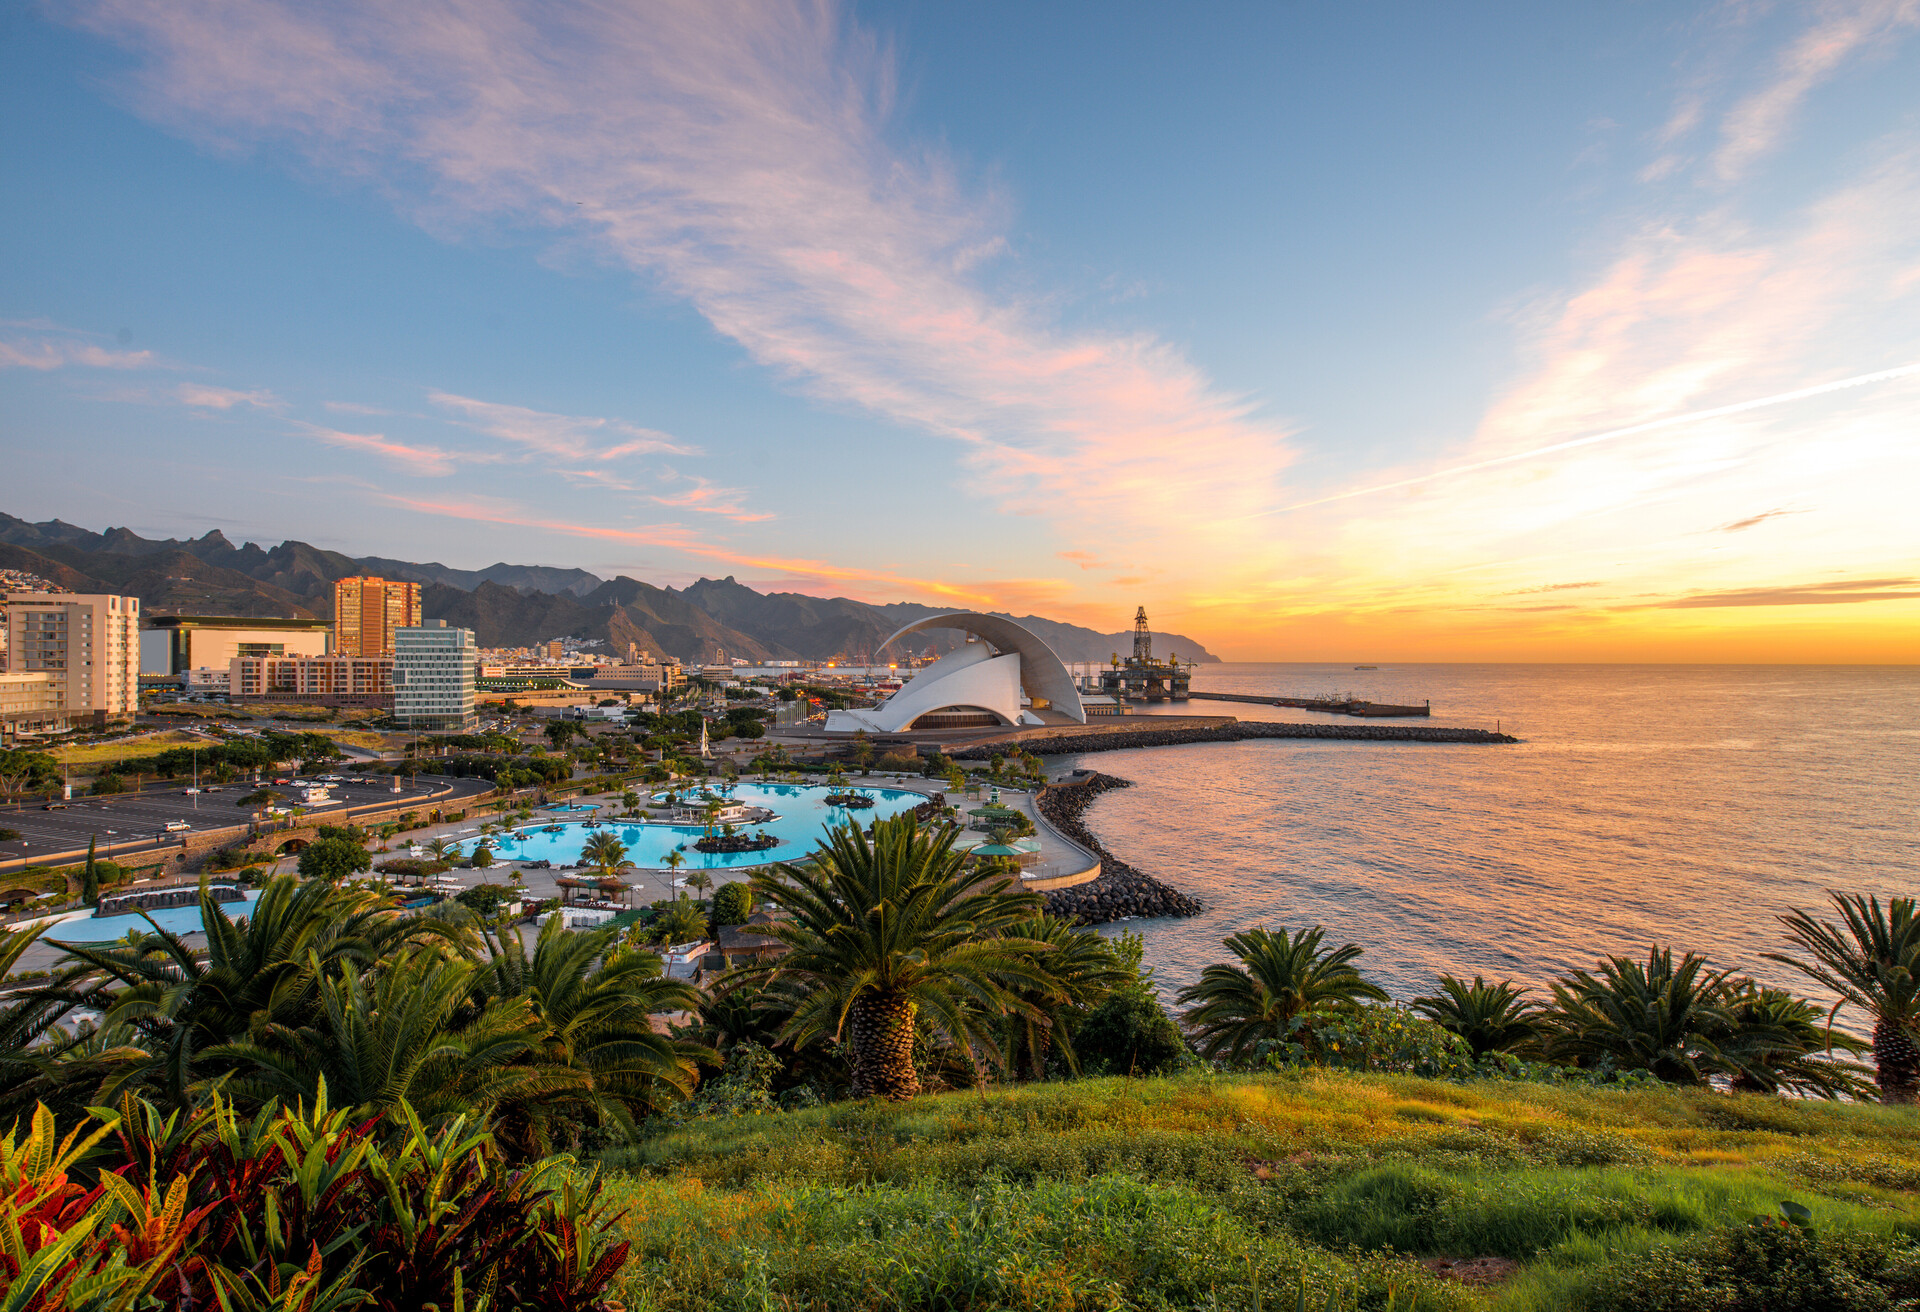 Santa Cruz cityscape view with park, ocean and mountains on the background on the sunrise, Canary islands, Spain  ; Shutterstock ID 362881445; Purpose: Destiny; Brand (KAYAK, Momondo, Any): Any